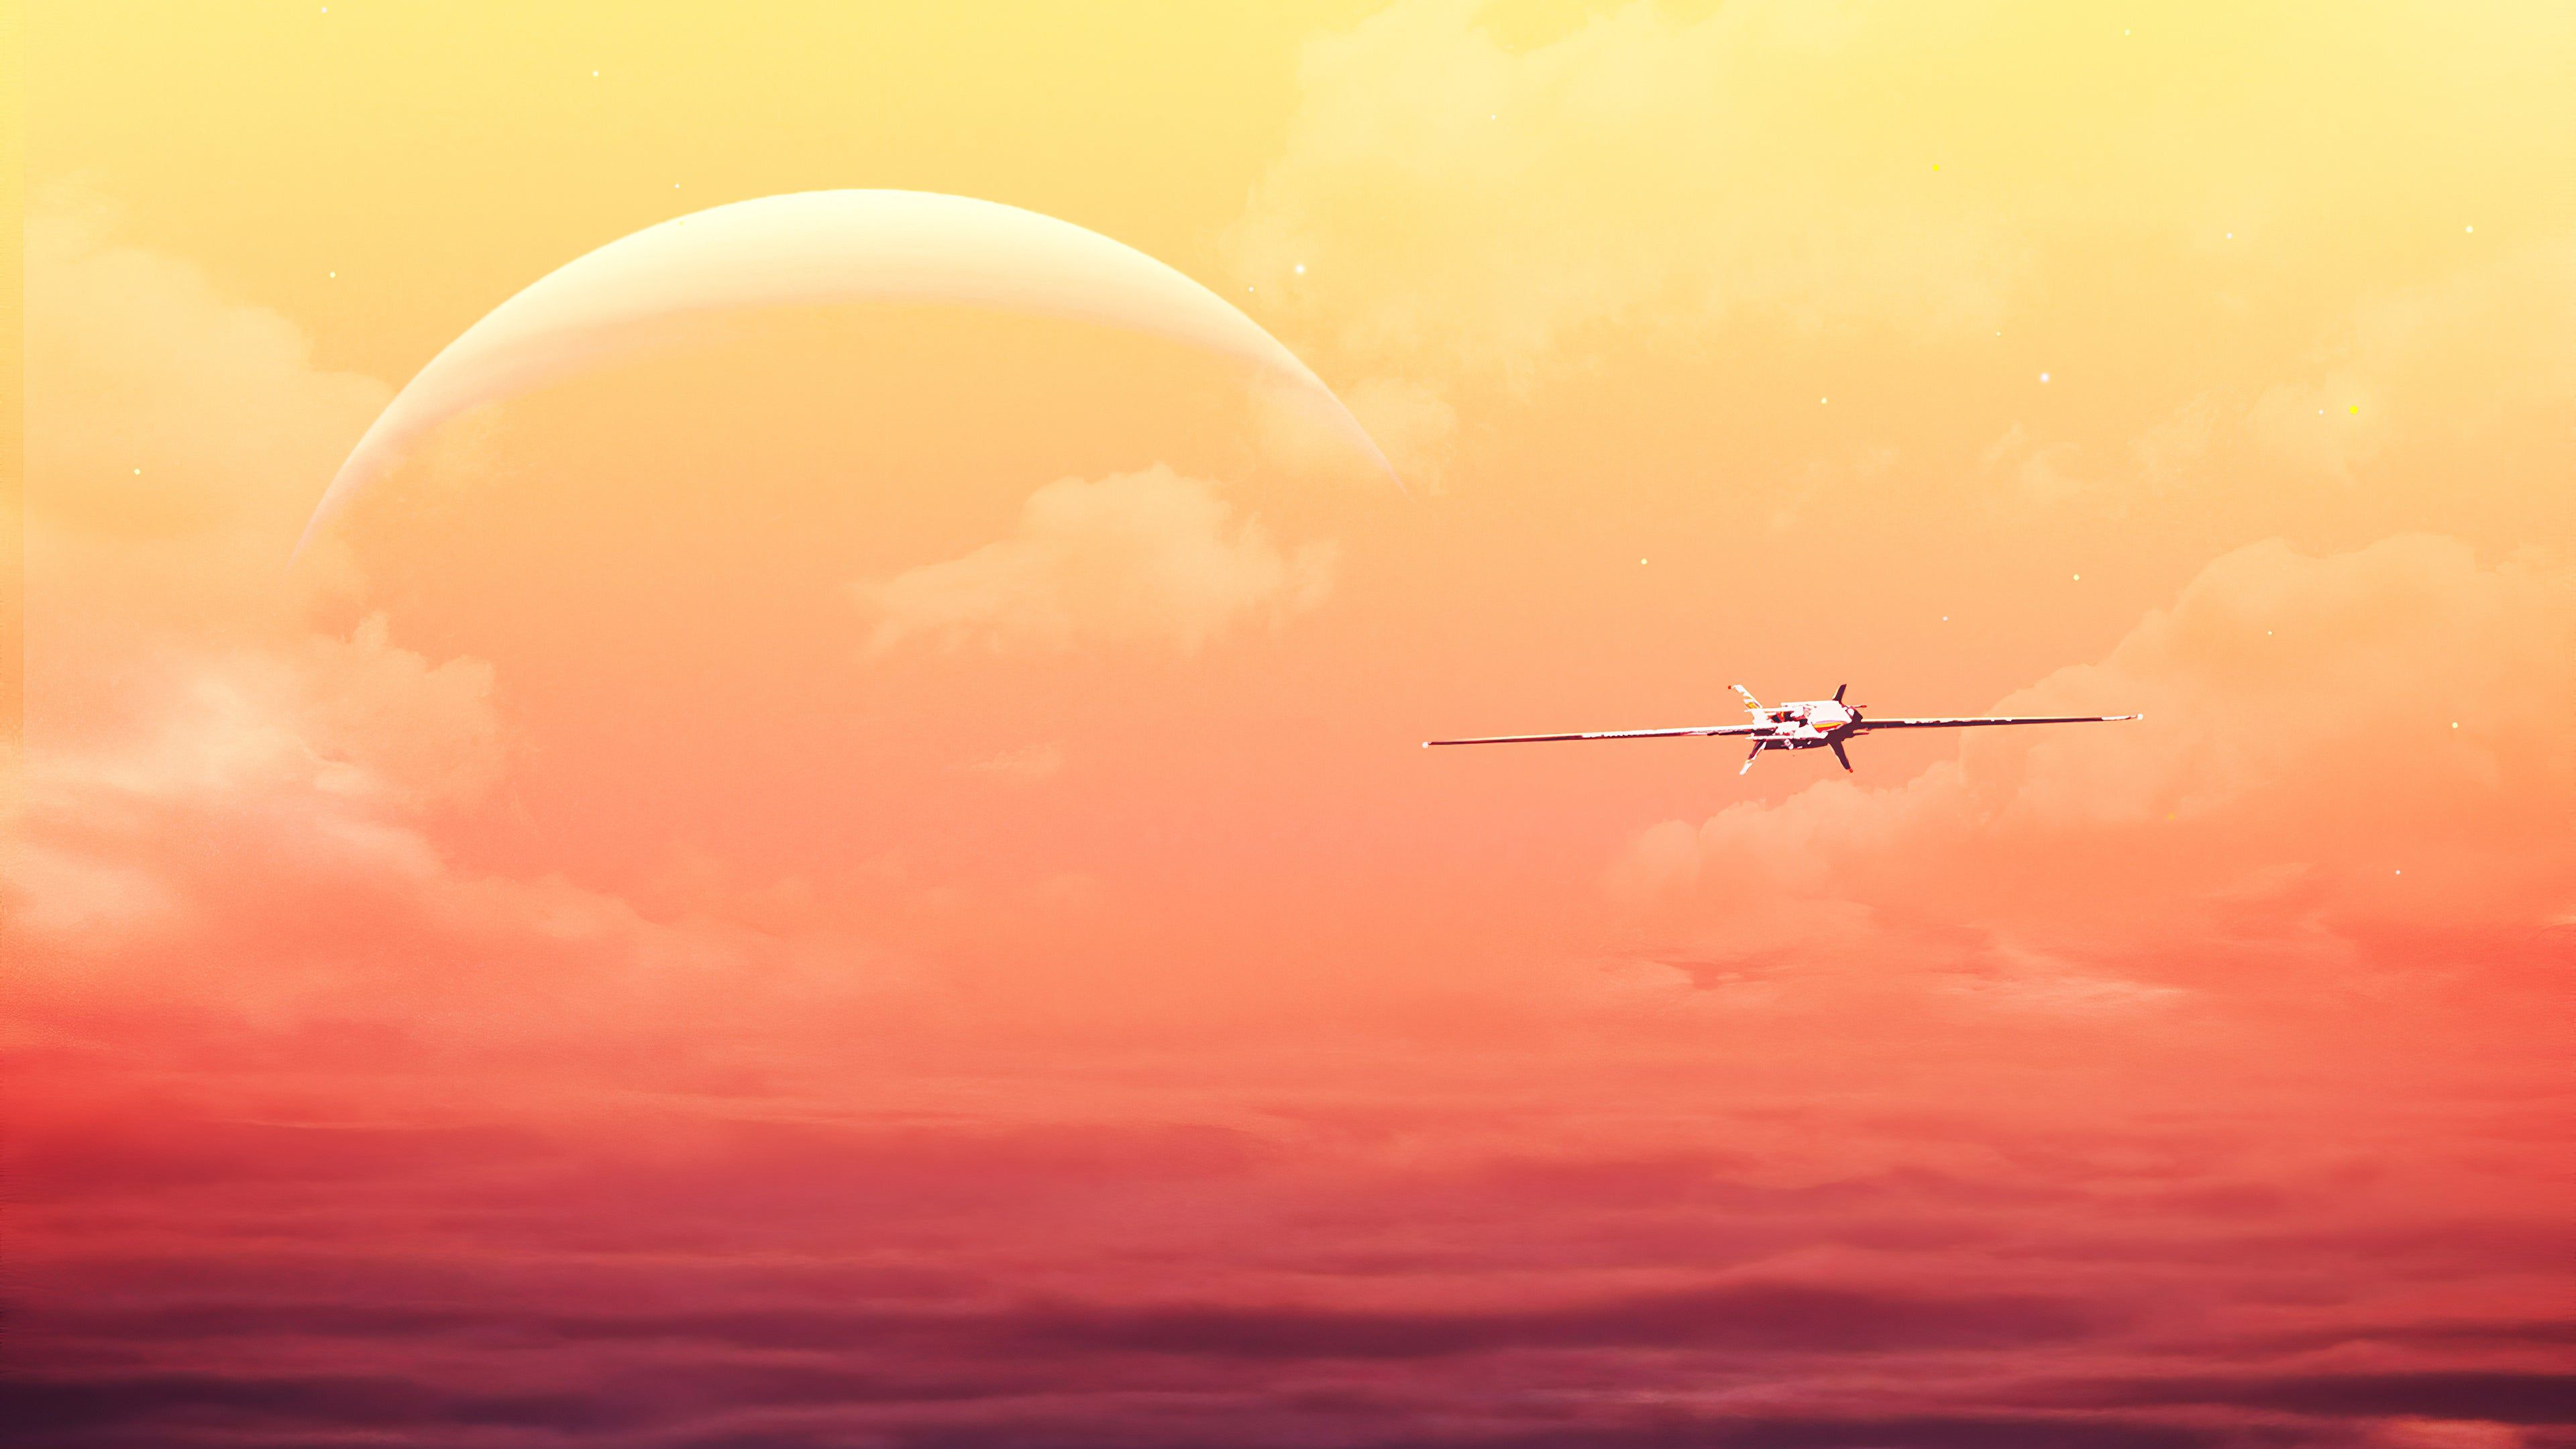 Plane 4K wallpaper for your desktop or mobile screen free and easy to download